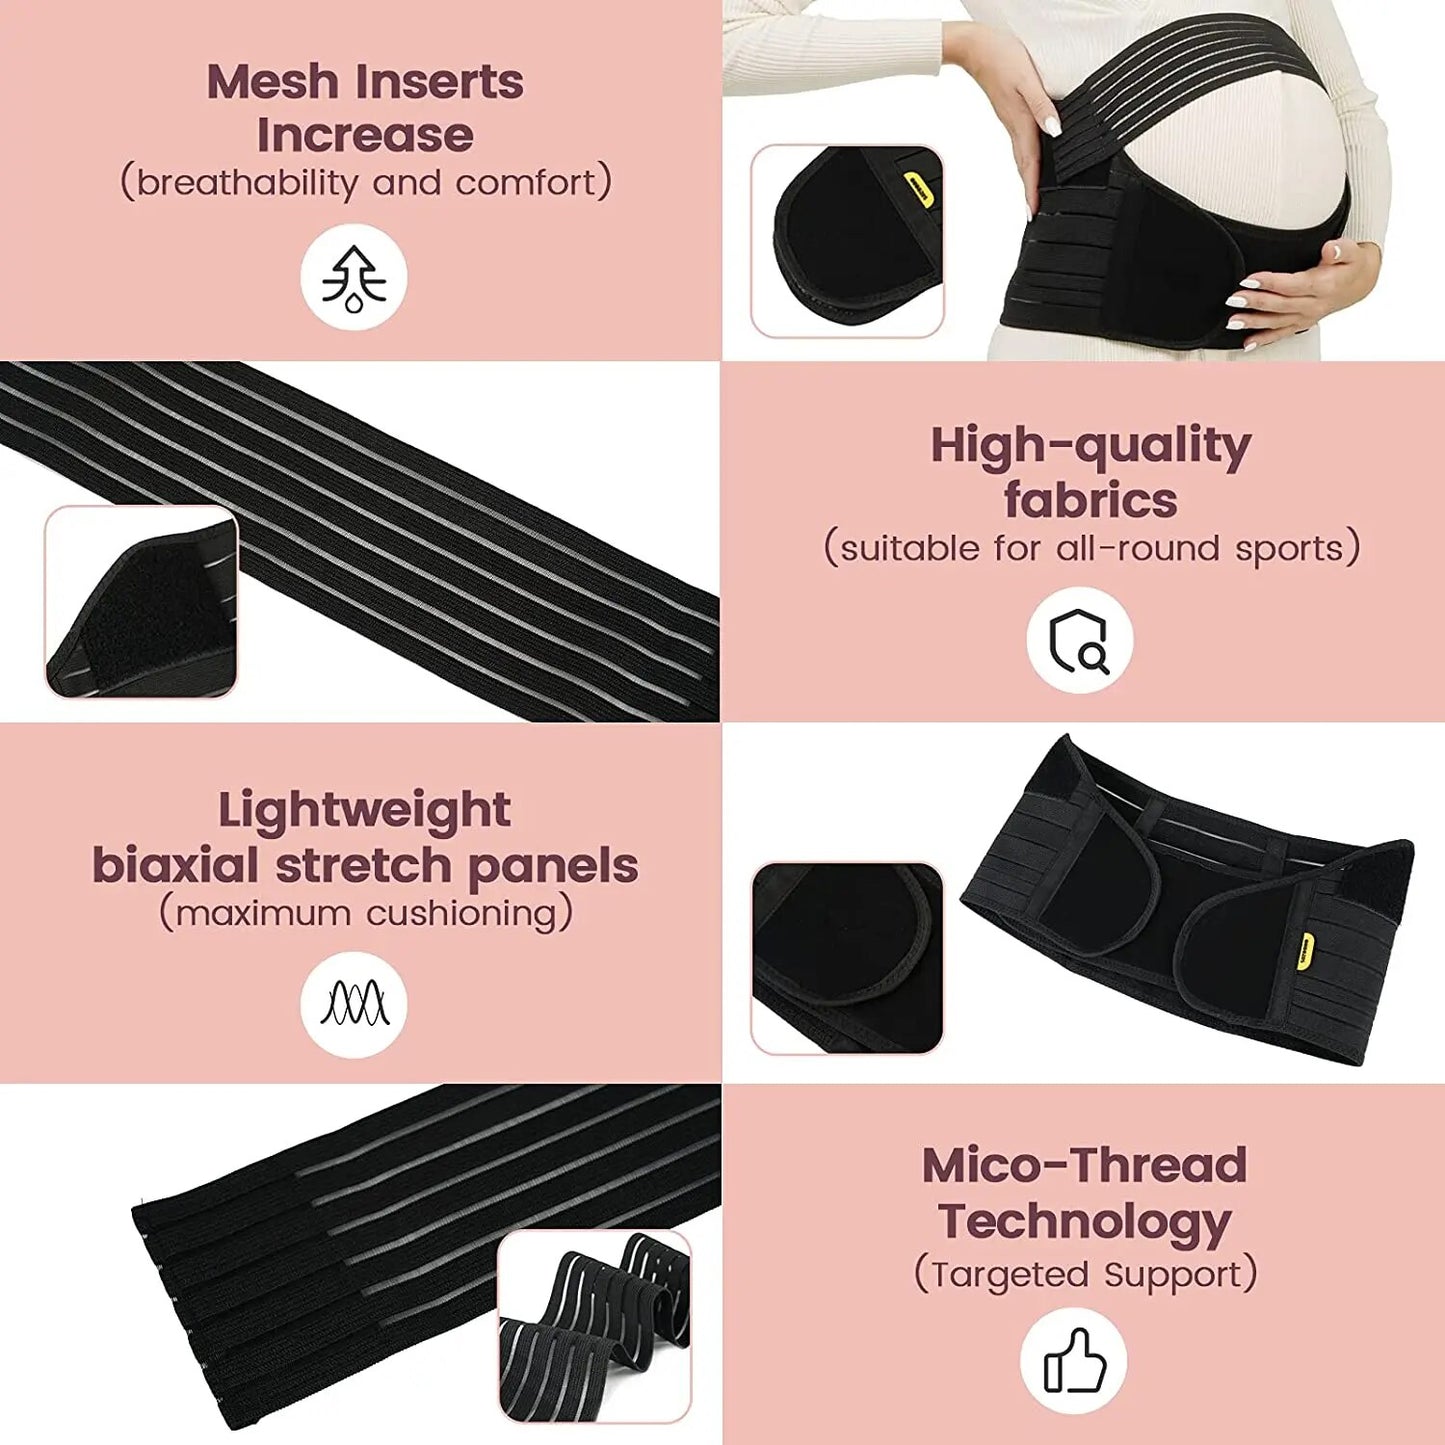 Pregnant Women Belts Maternity Belly Belt Waist Care Abdomen Support Belly Band Back Brace Protector pregnant  maternity clothes